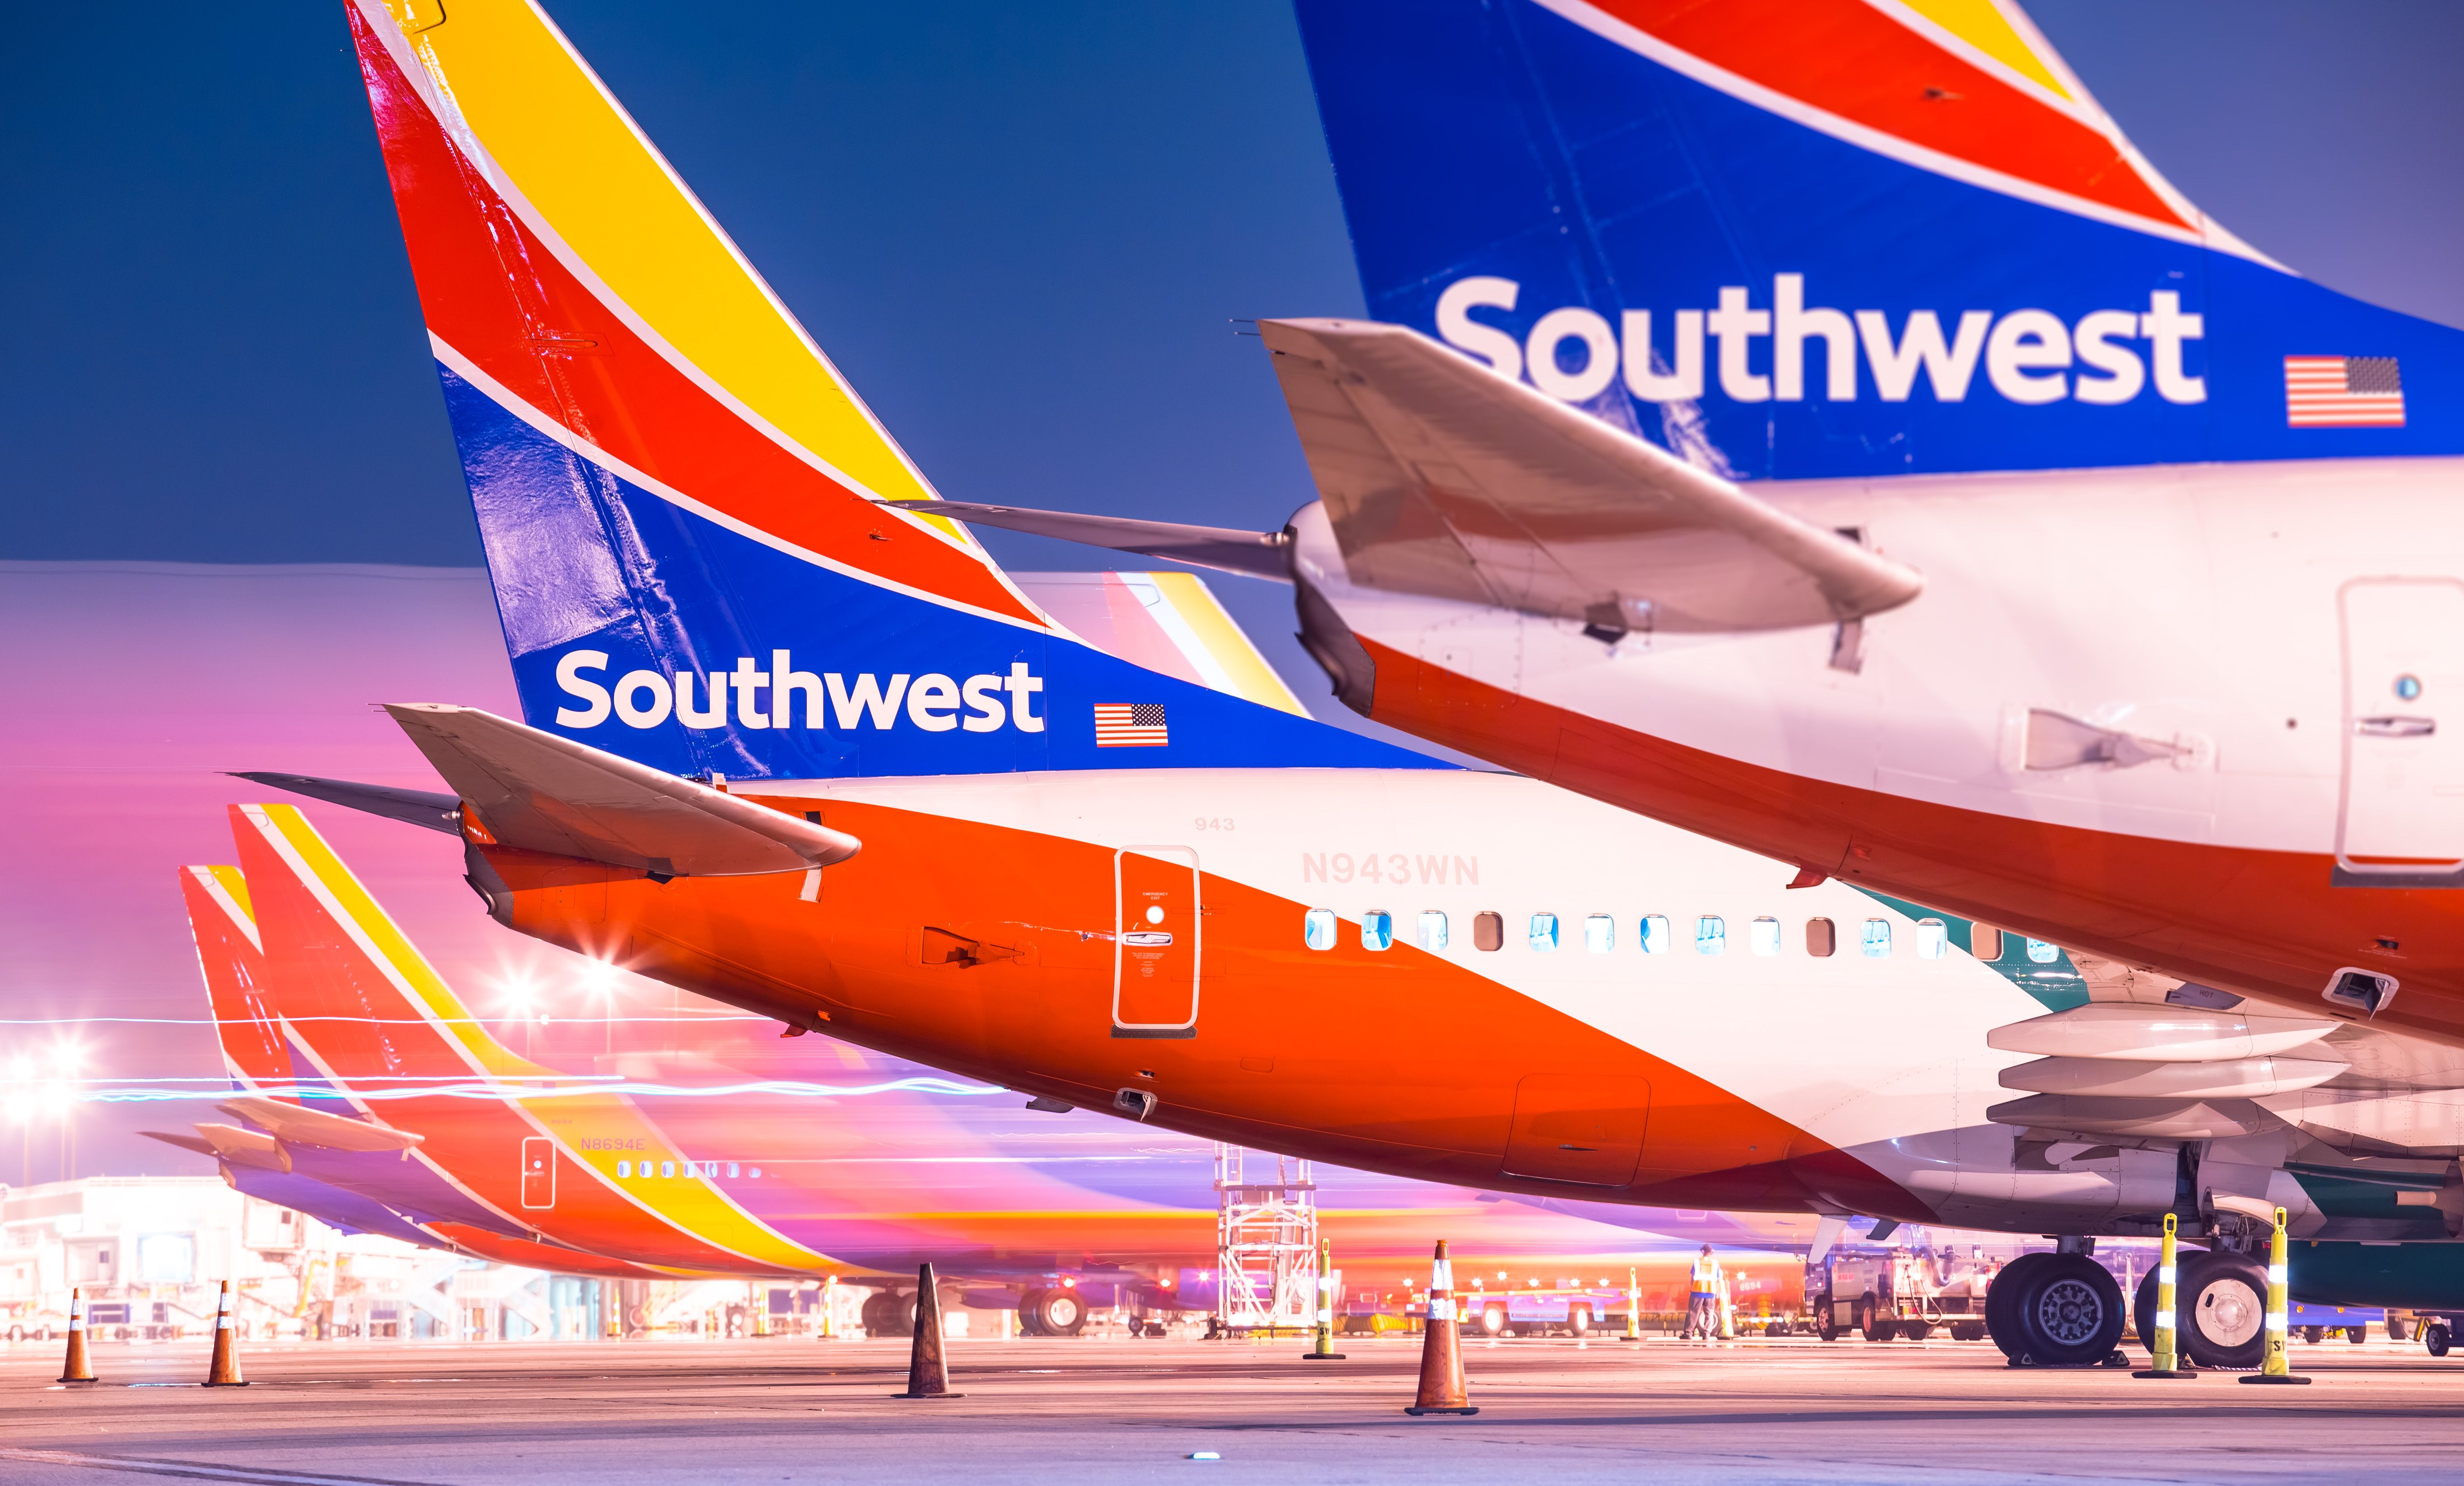 Southwest Airlines 737 tails in Ontario International Airport twilight